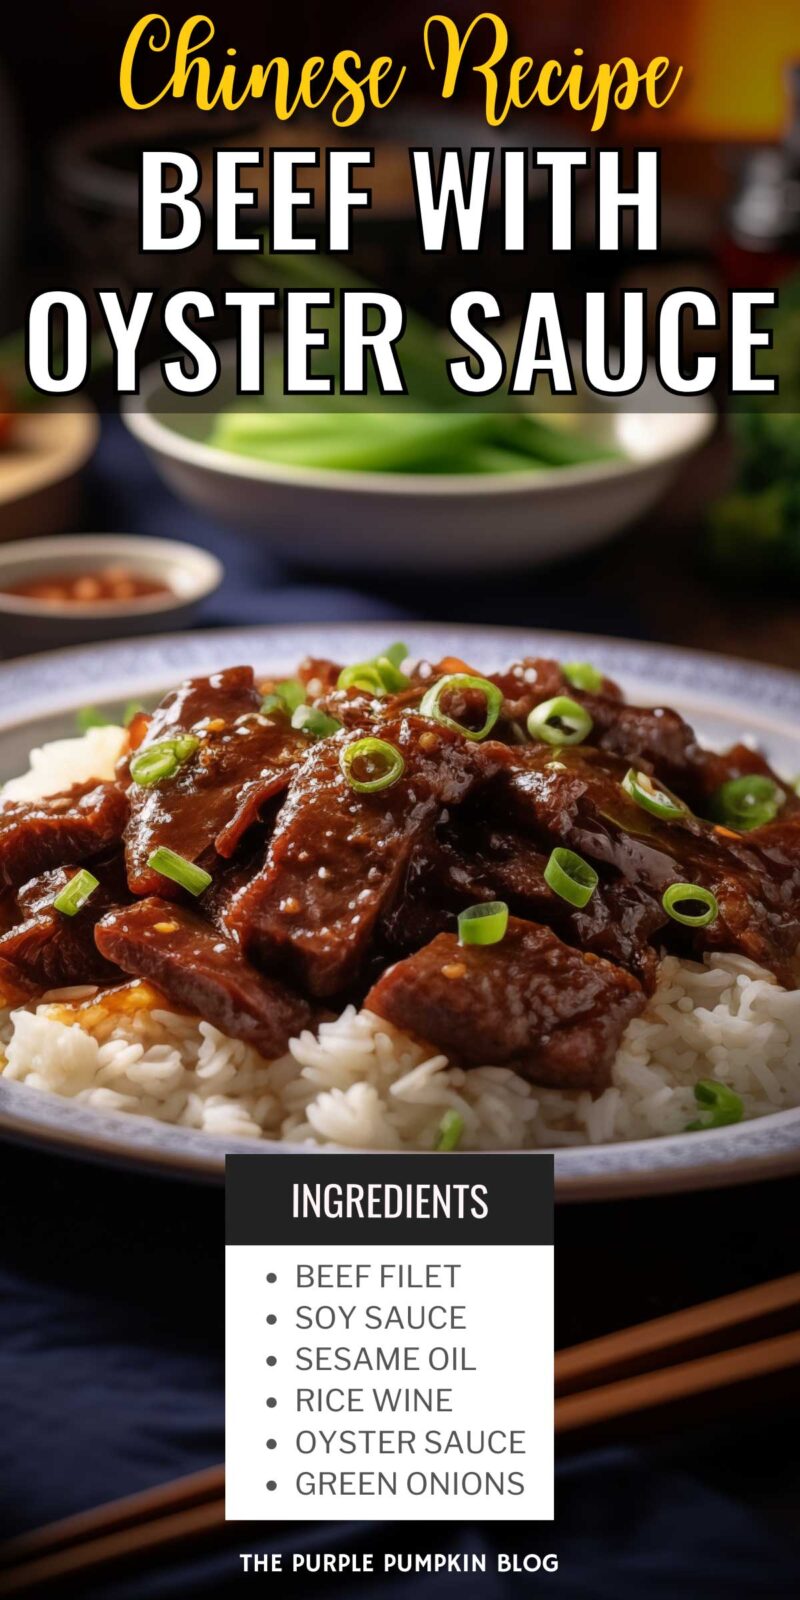 A plate of Beef with Oyster Sauce with recipe ingredients list.